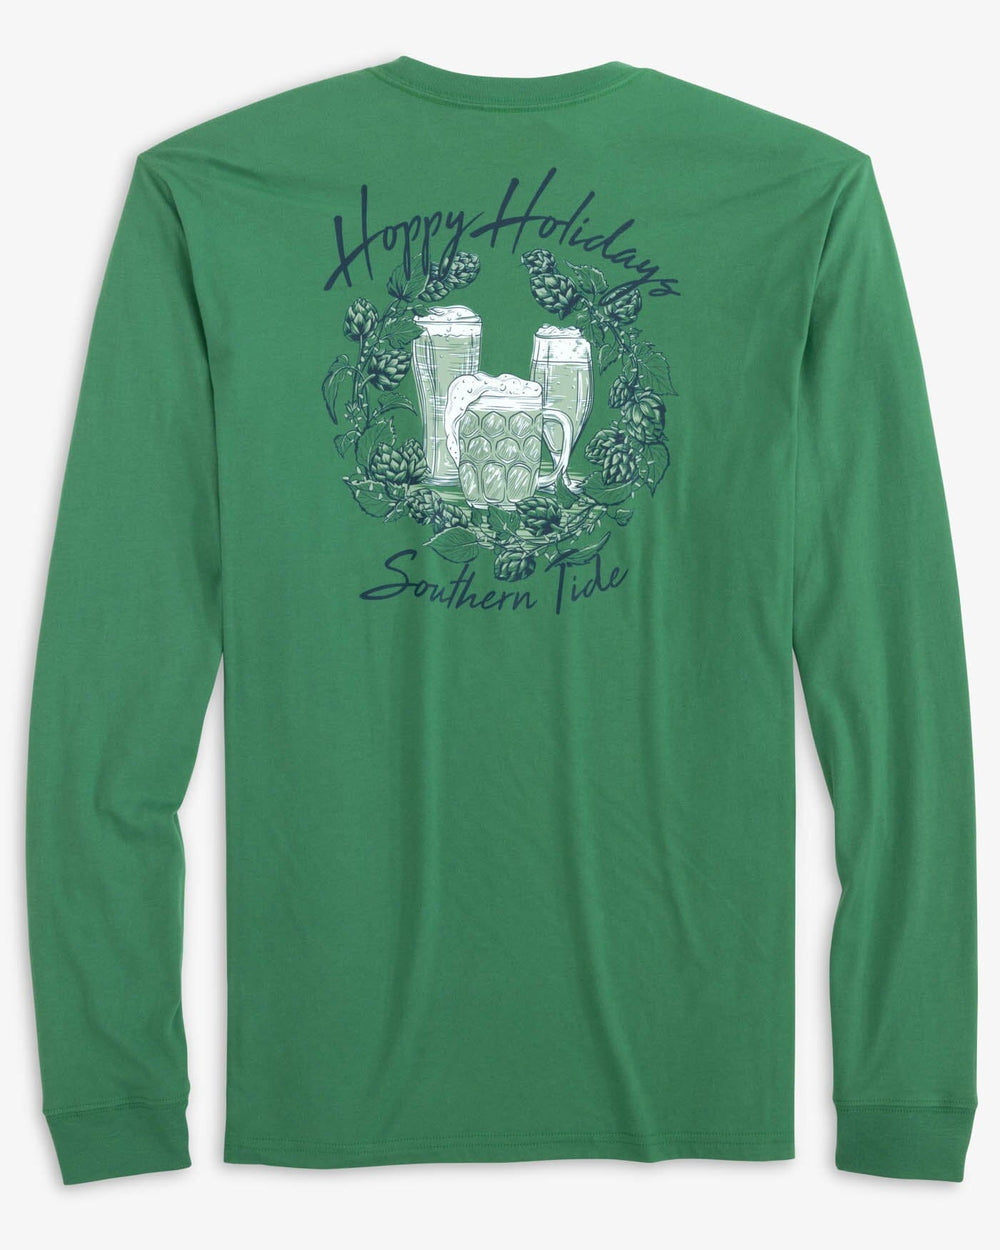 The back view of the Southern Tide Hoppy Holidays Long Sleeve T-shirt by Southern Tide - Fir